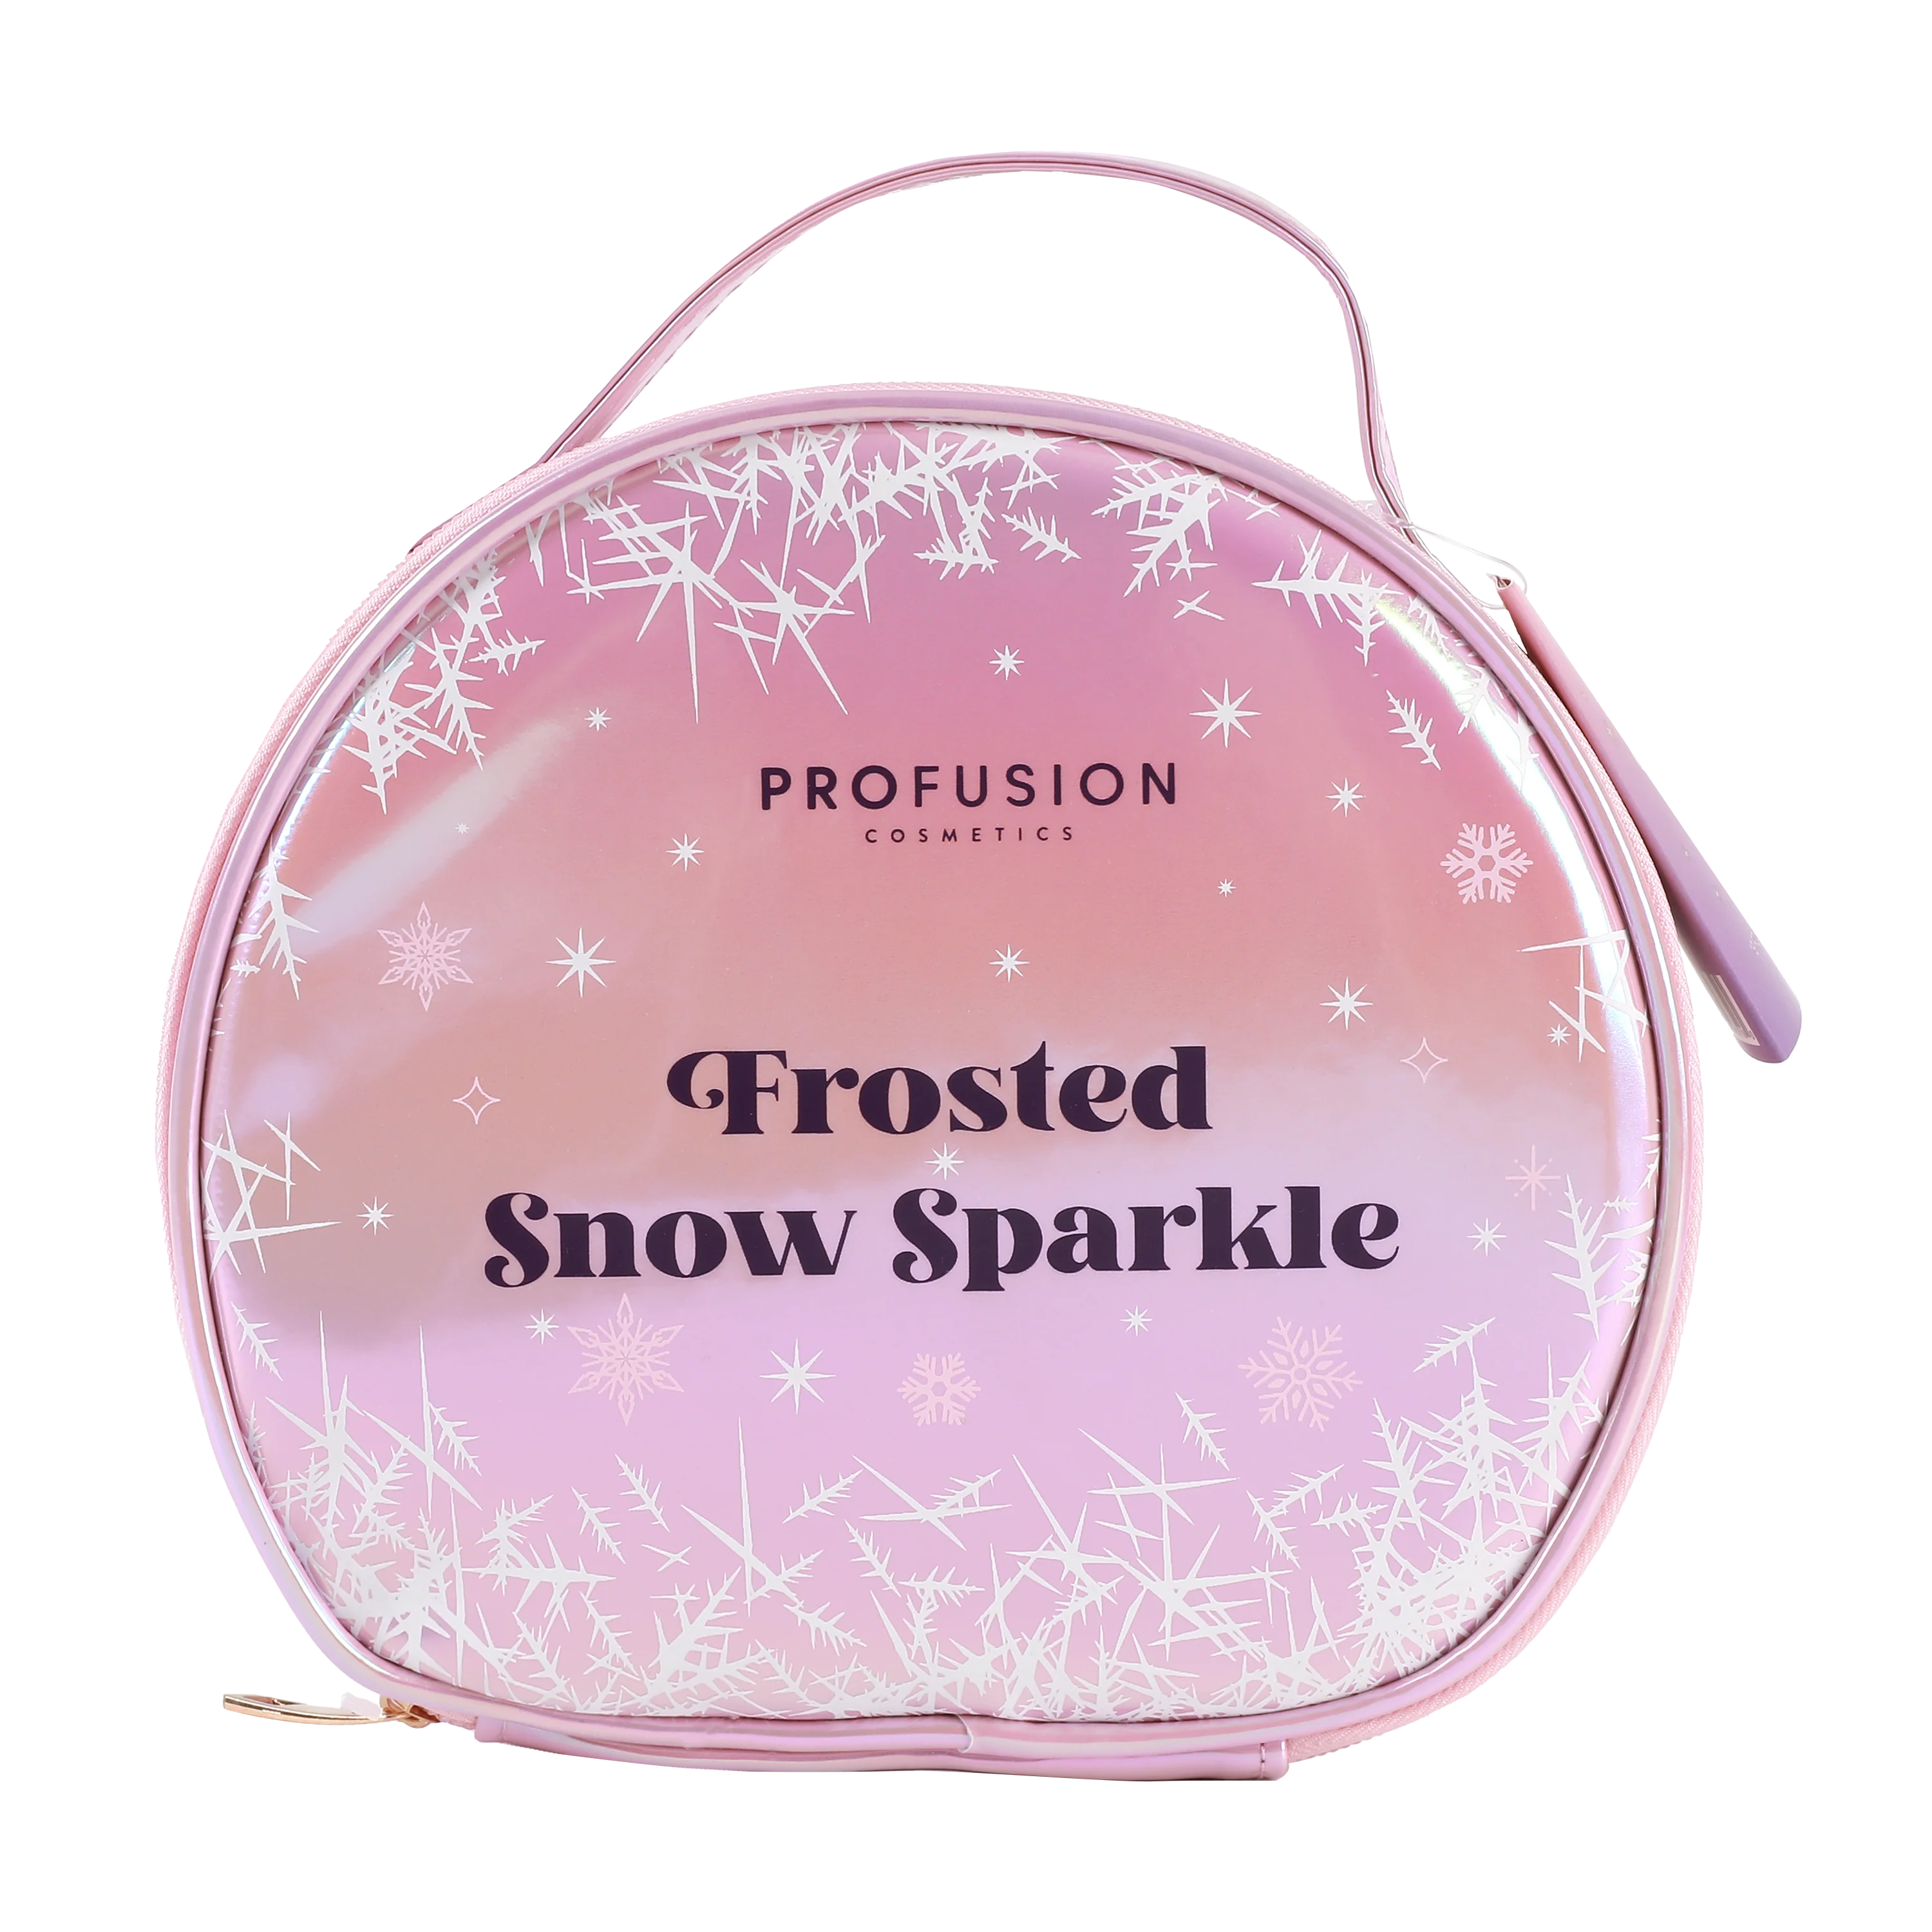 Profusion - Frosted Snow Sparkle Beauty Box